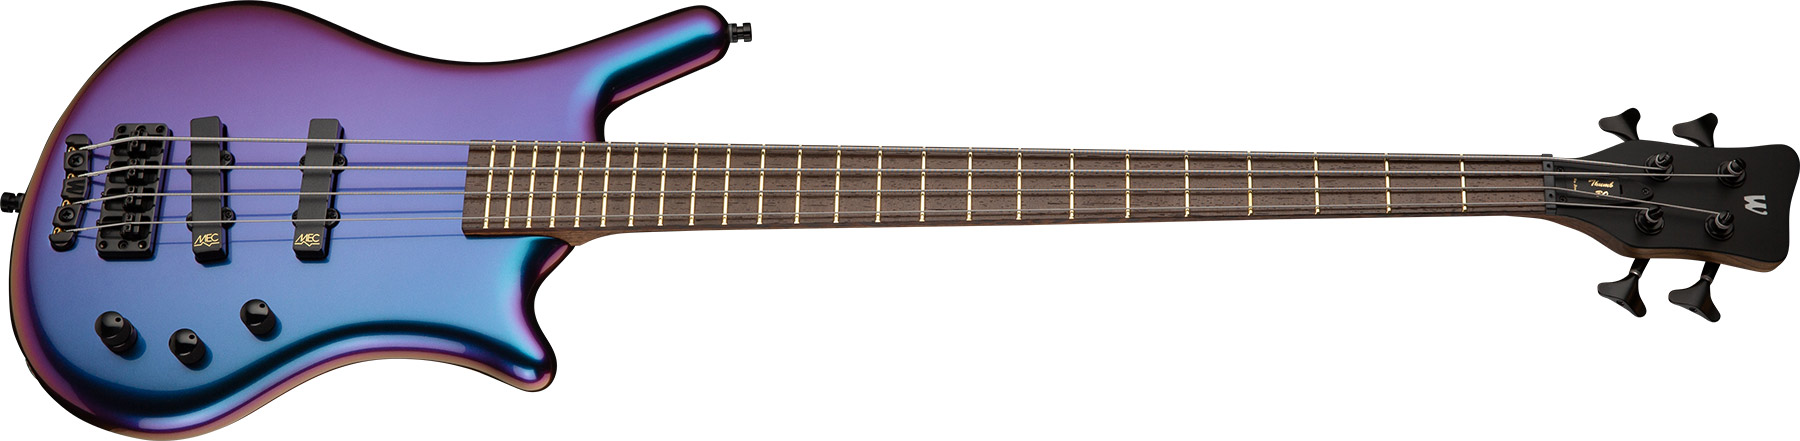 Warwick Custom Shop Thumb Bo 4c Pro Gps All Active Eb - Special Flip Flop - Solid body electric bass - Variation 1